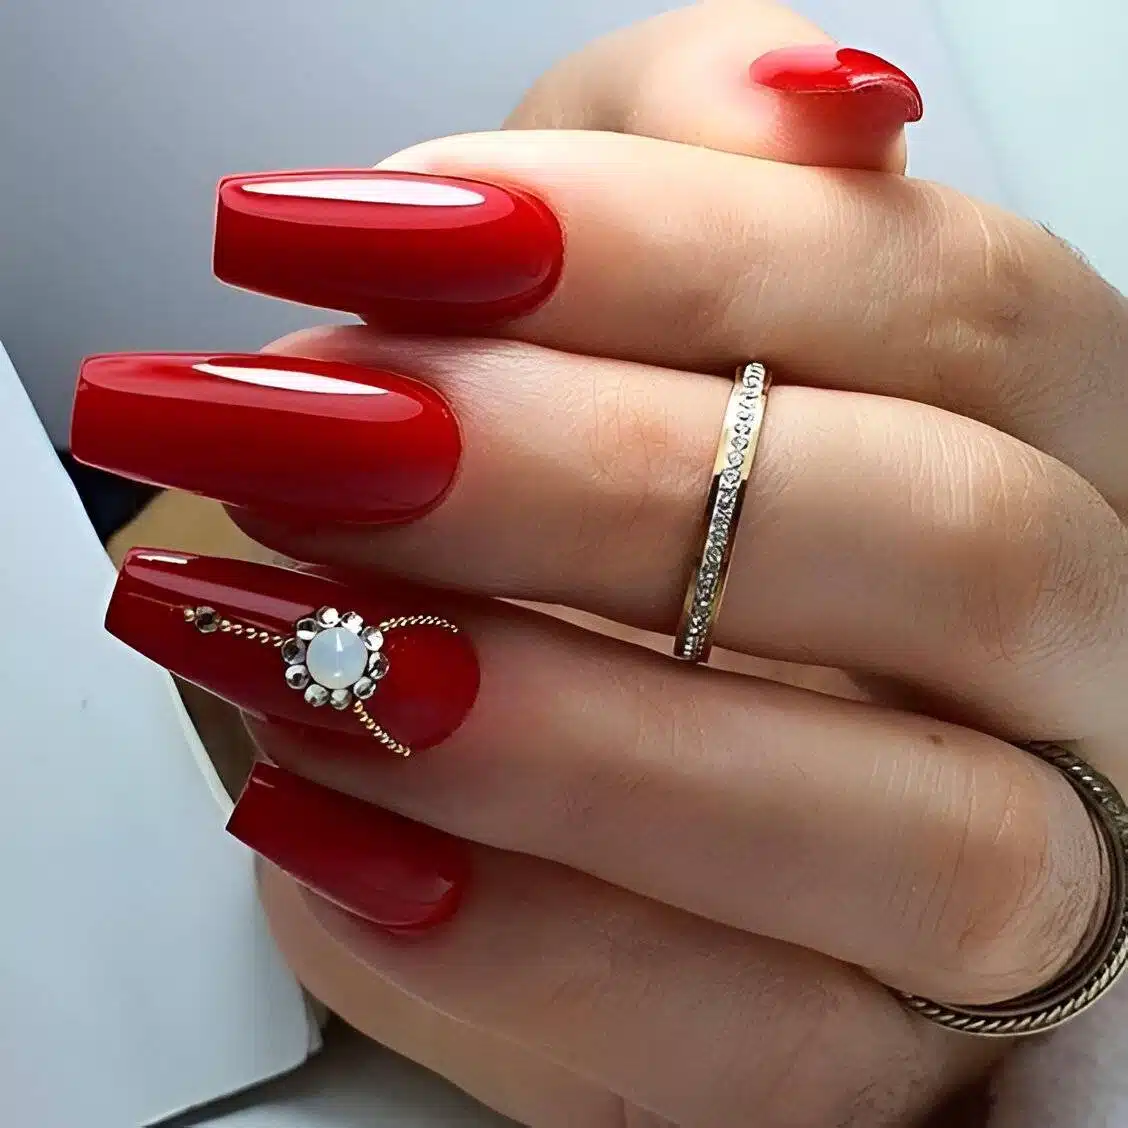 30 Red Nail Designs That Are The Epitome Of Feminine Beauty - 205